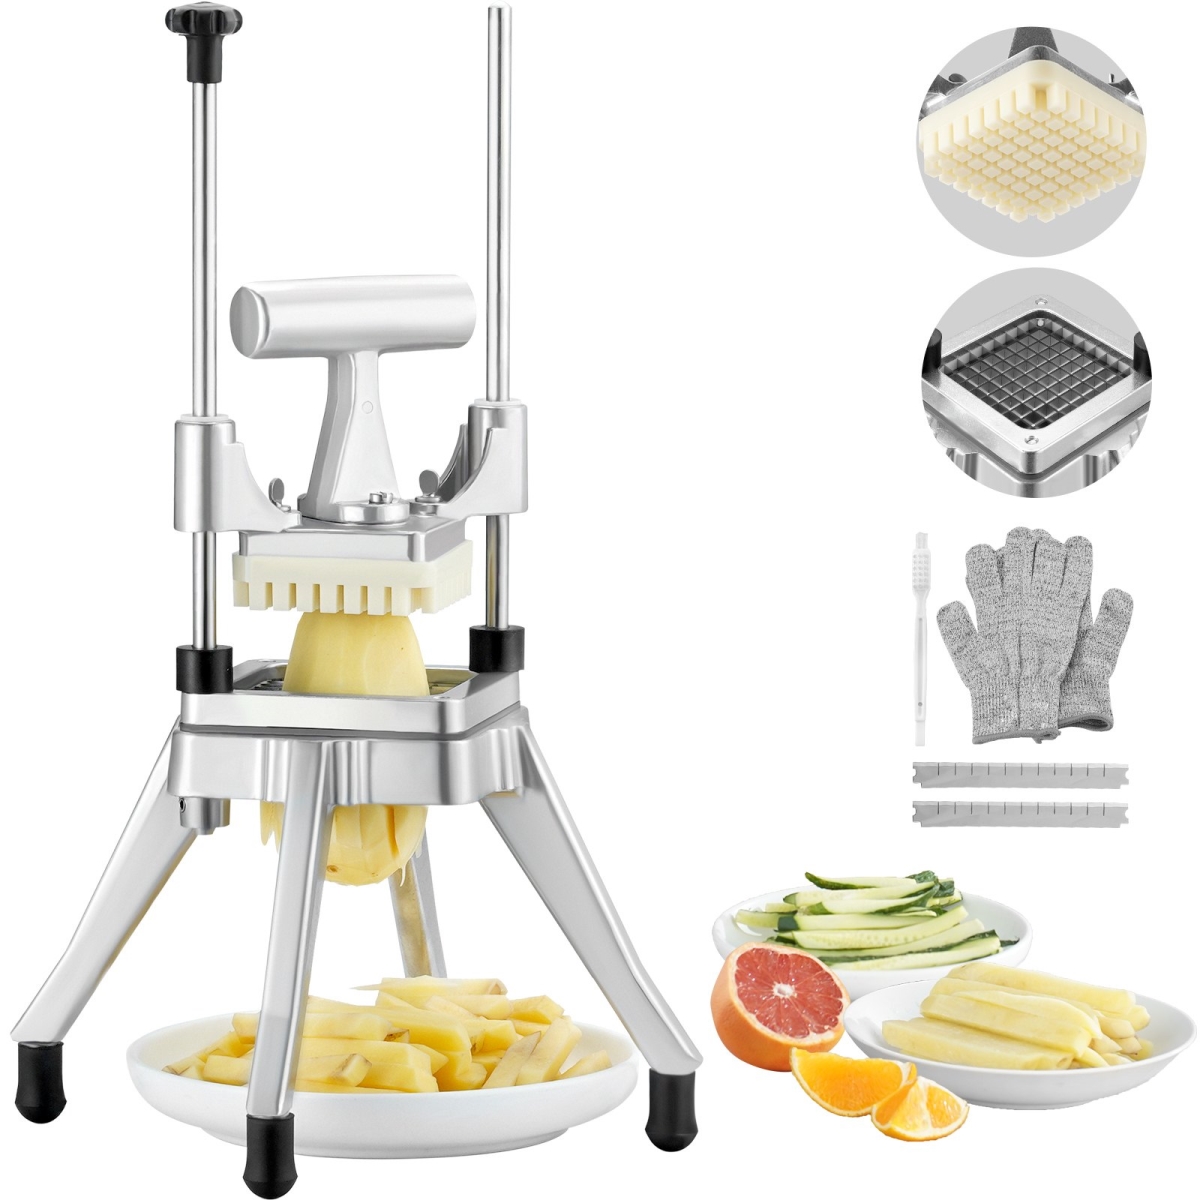 Picture of Vevor ZT38INCH420J2LKZUV0 Commercial Vegetable Fruit Chopper&#44; 0.37 in. Blade Heavy Duty Professional Food Dicer Kattex French Fry Cutter Onion Slicer Stainless Steel - Sliver